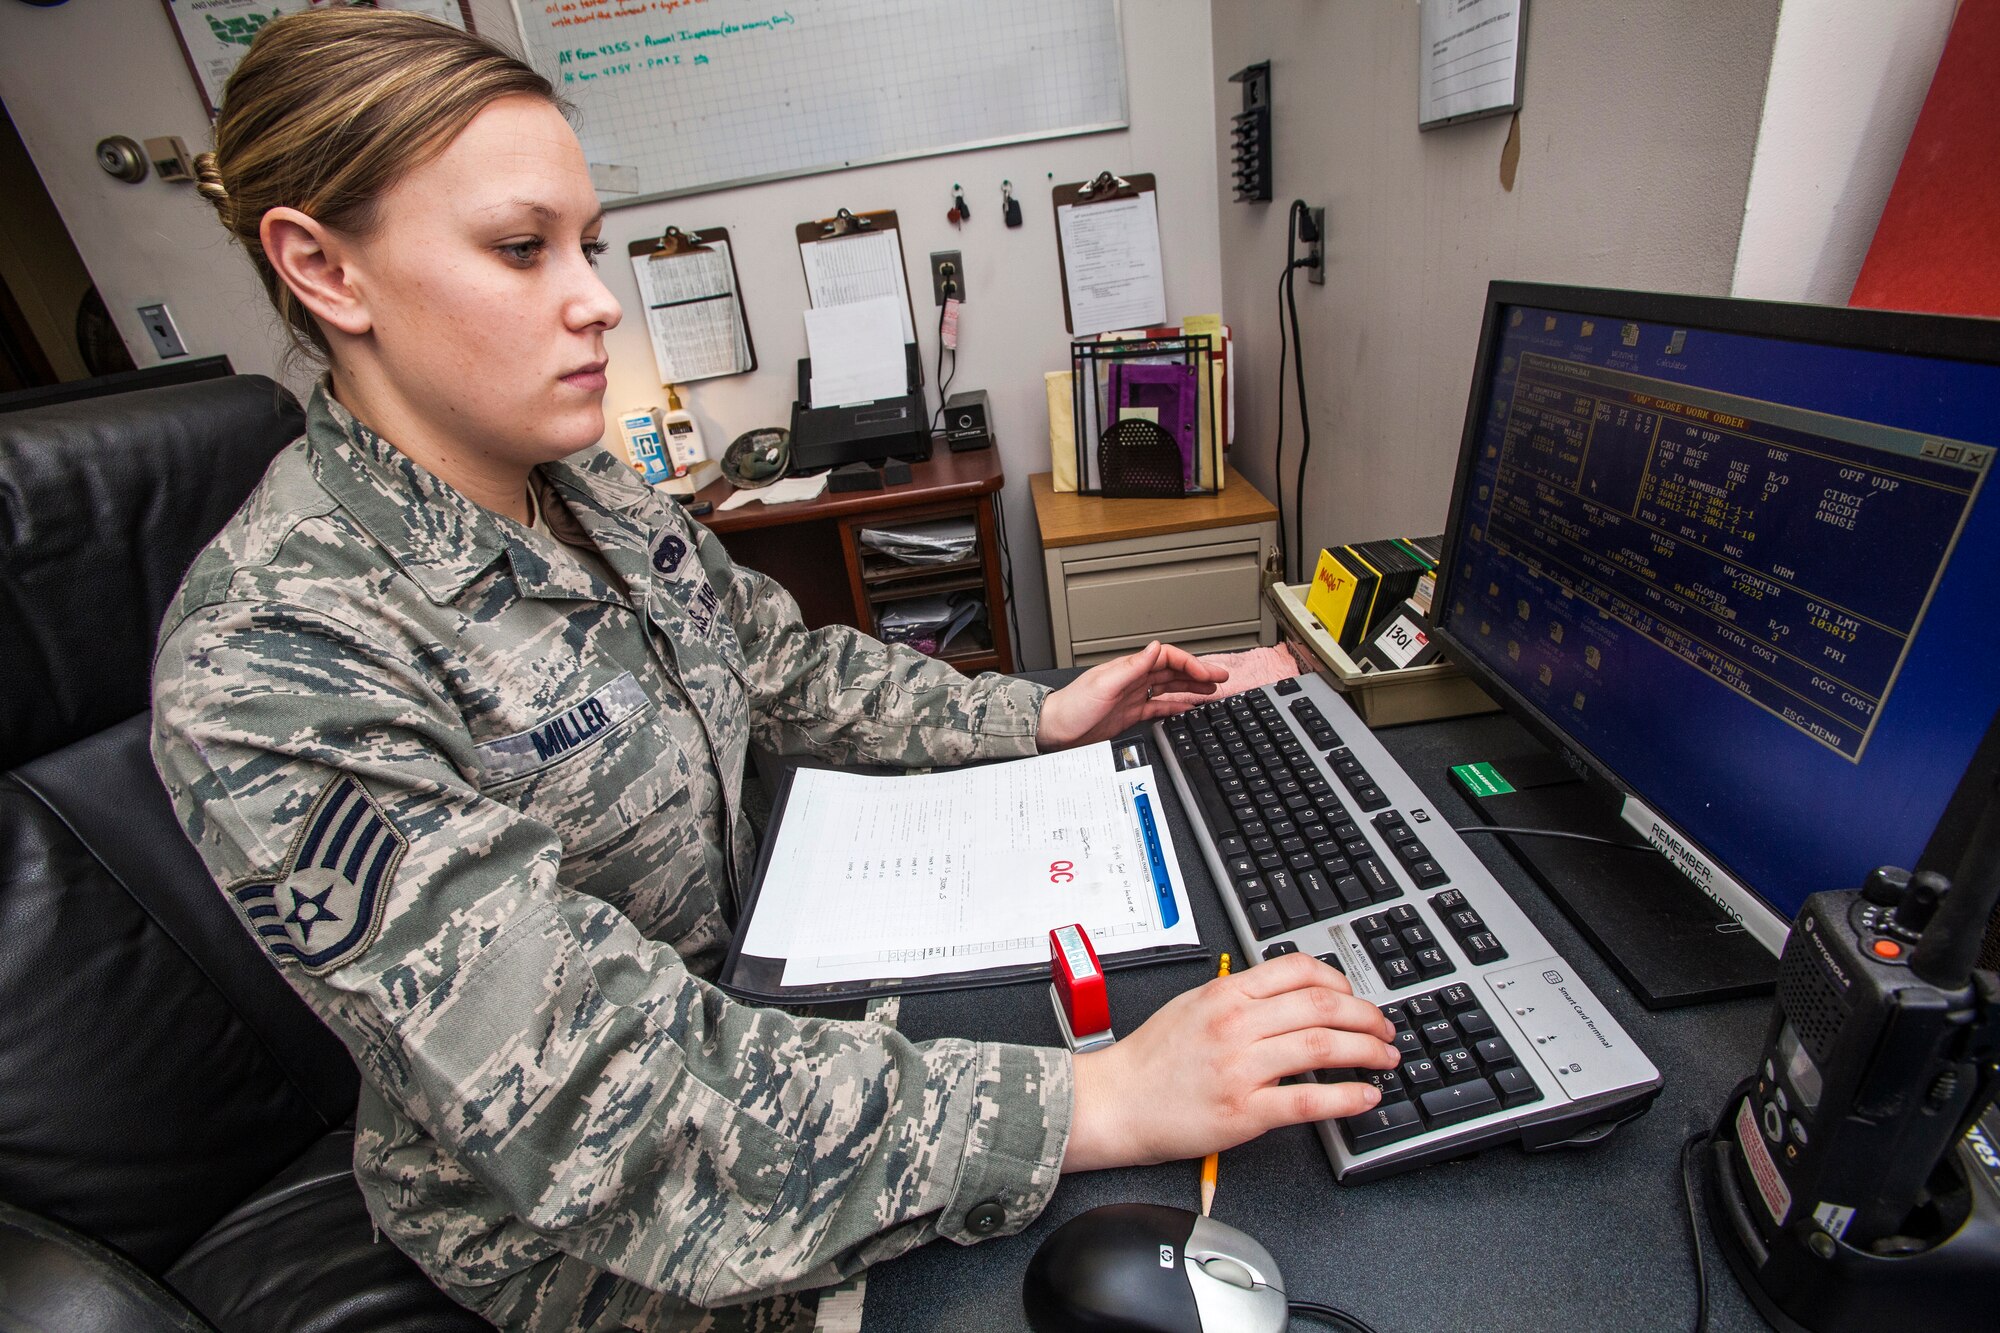 Staff Sgt. Danielle Miller, enters a work order at the 108th Wing Vehicle Management Section, New Jersey Air National Guard, Joint Base McGuire-Dix-Lakehurst, N.J., Jan. 10, 2015. Miller is a vehicle management and analysis technician assigned to Vehicle Maintenance, which is part of the 108th Logistics Readiness Squadron. (U.S. Air National Guard photo by Master Sgt. Mark C. Olsen/Released)